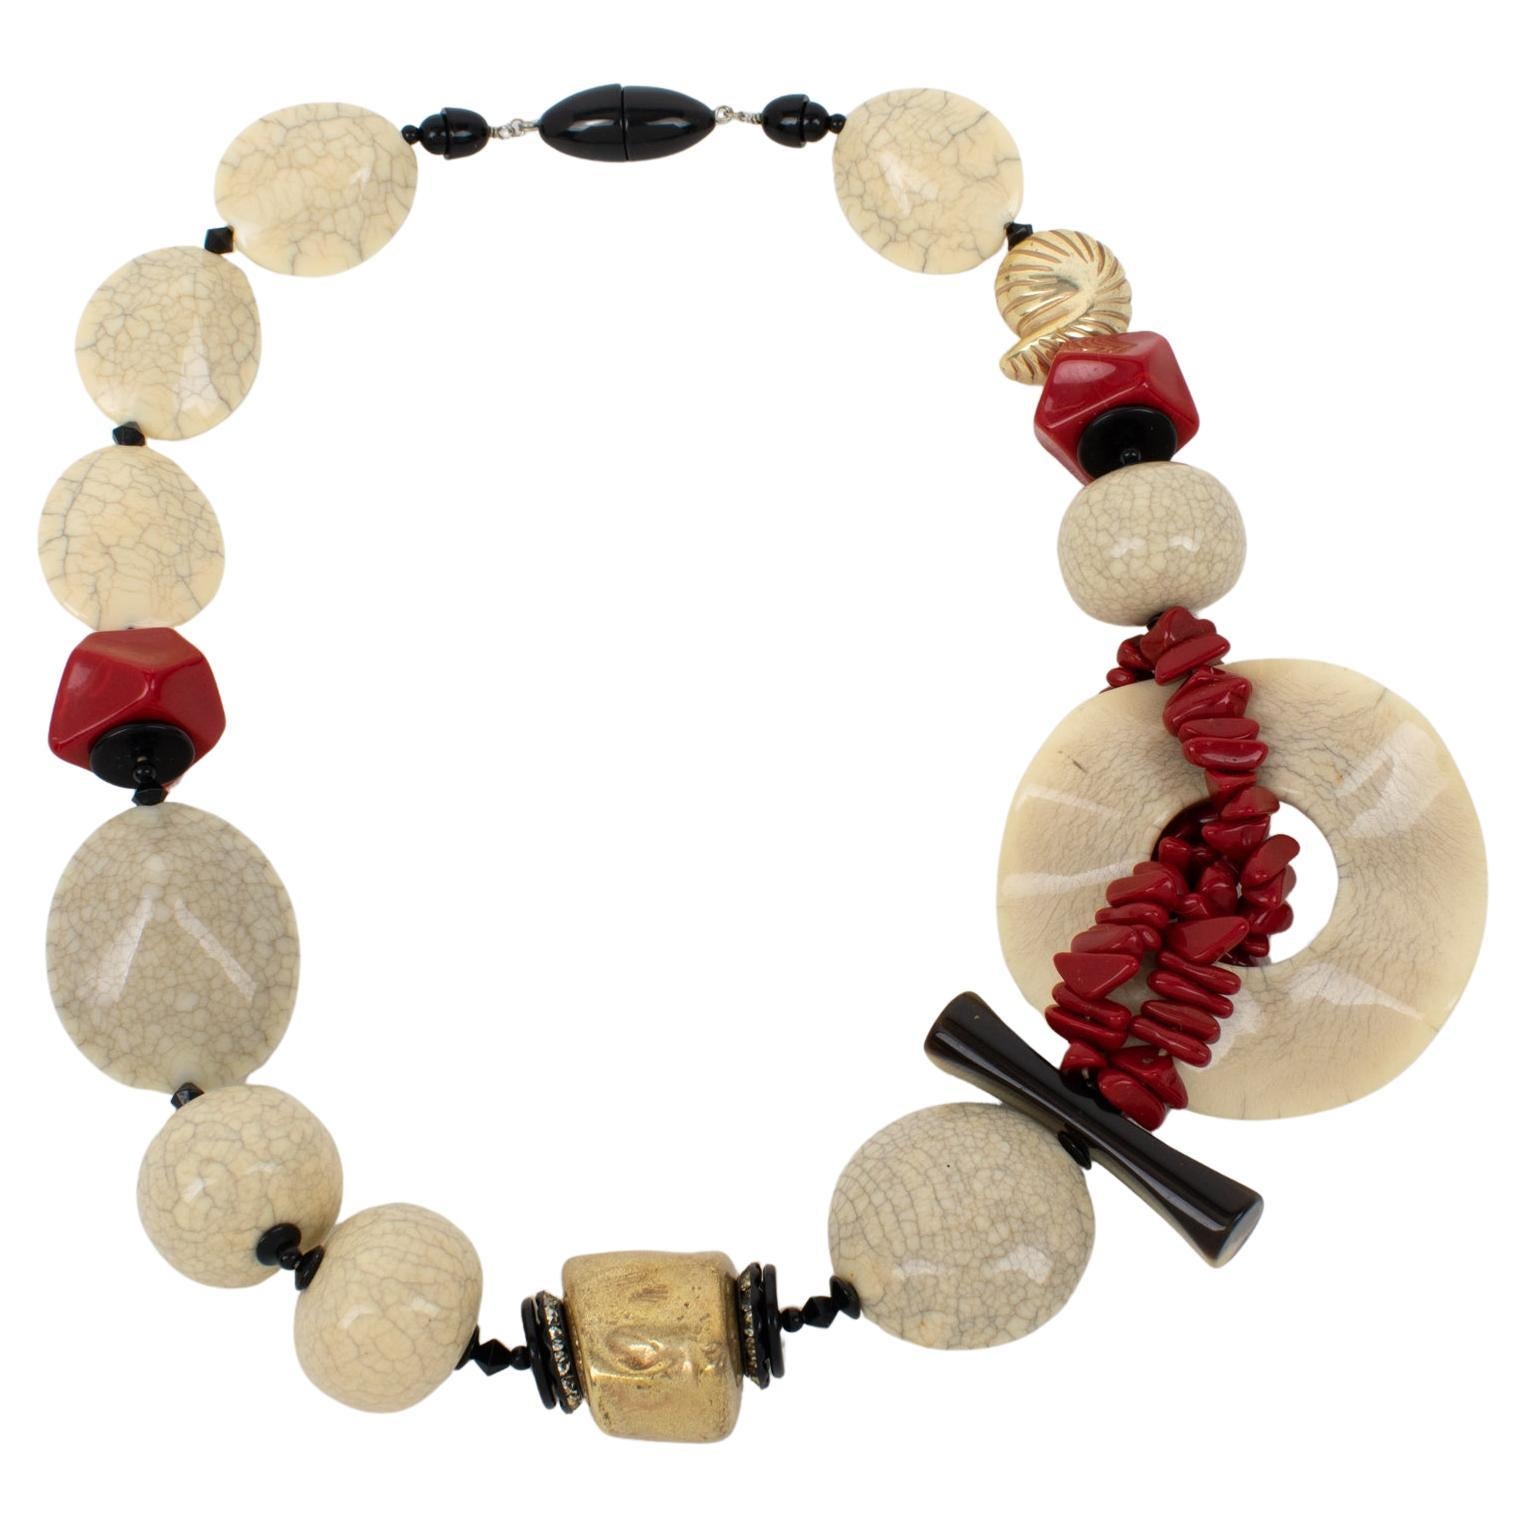 Angela Caputi Japanese Inspired Oversized Resin Necklace with Faux-Ceramic Beads For Sale